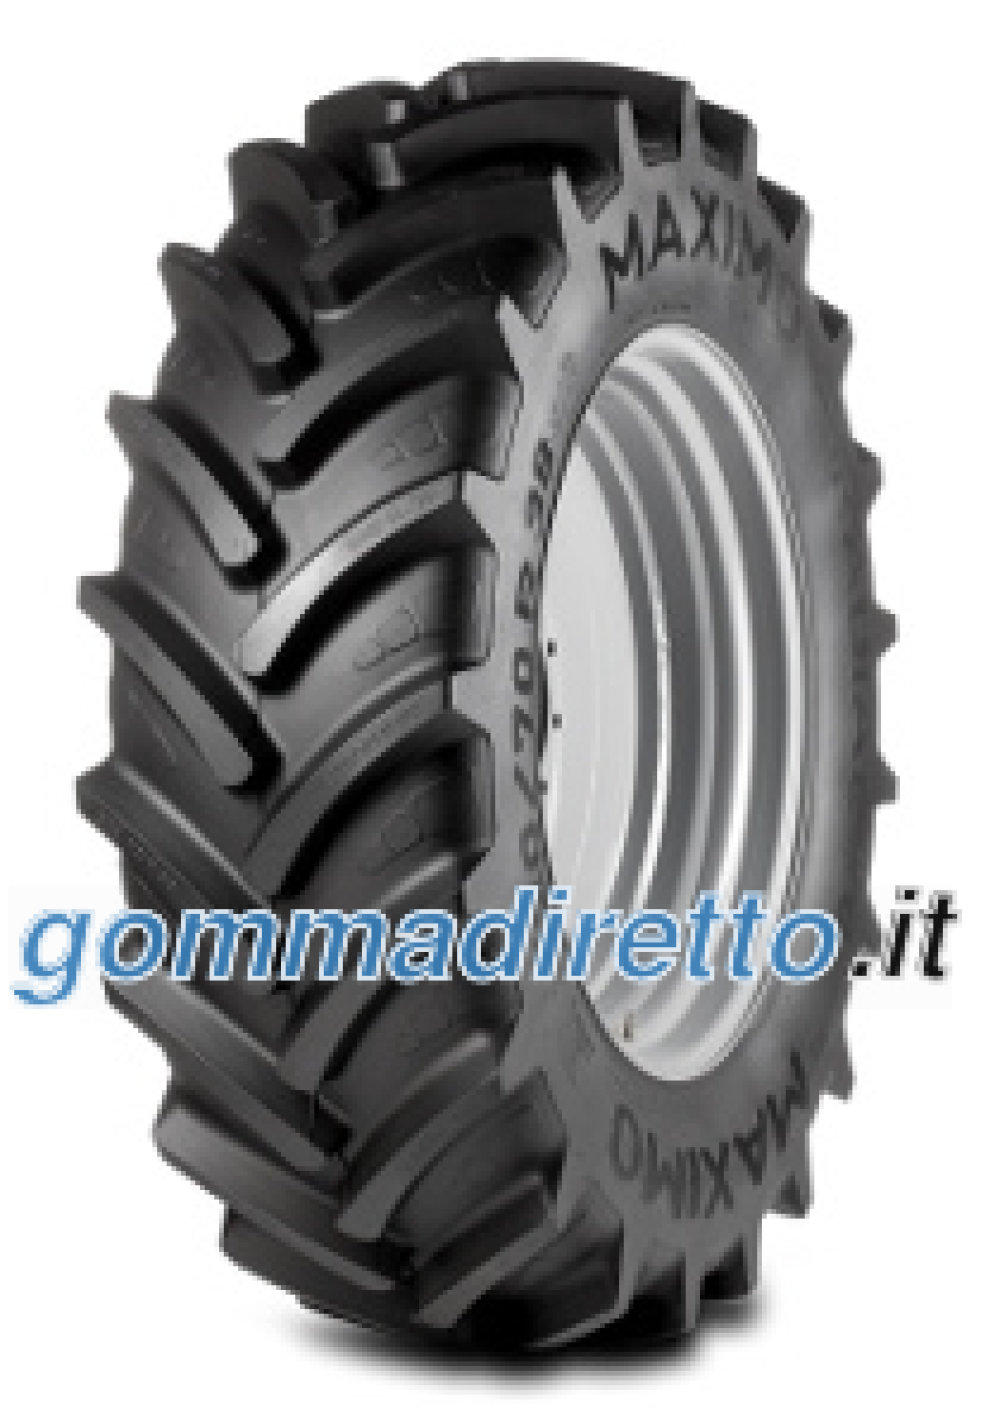 Image of Maximo Radial 70 ( 380/70 R28 127A8 TL )